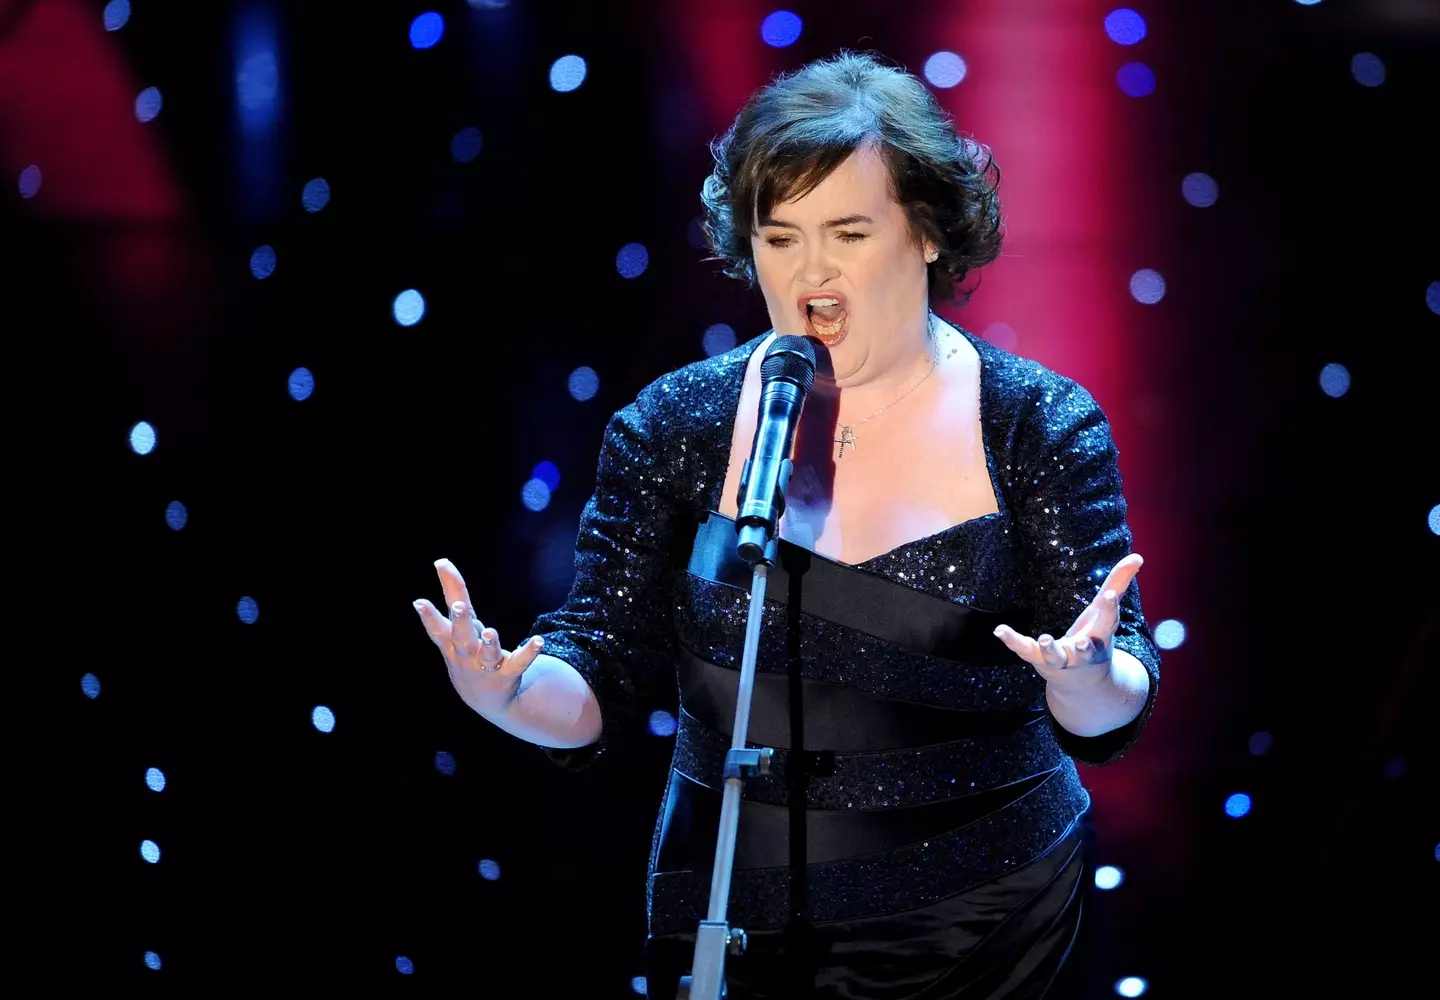 Susan Boyle rose to fame after appearing on Britain's Got Talent in 2009.